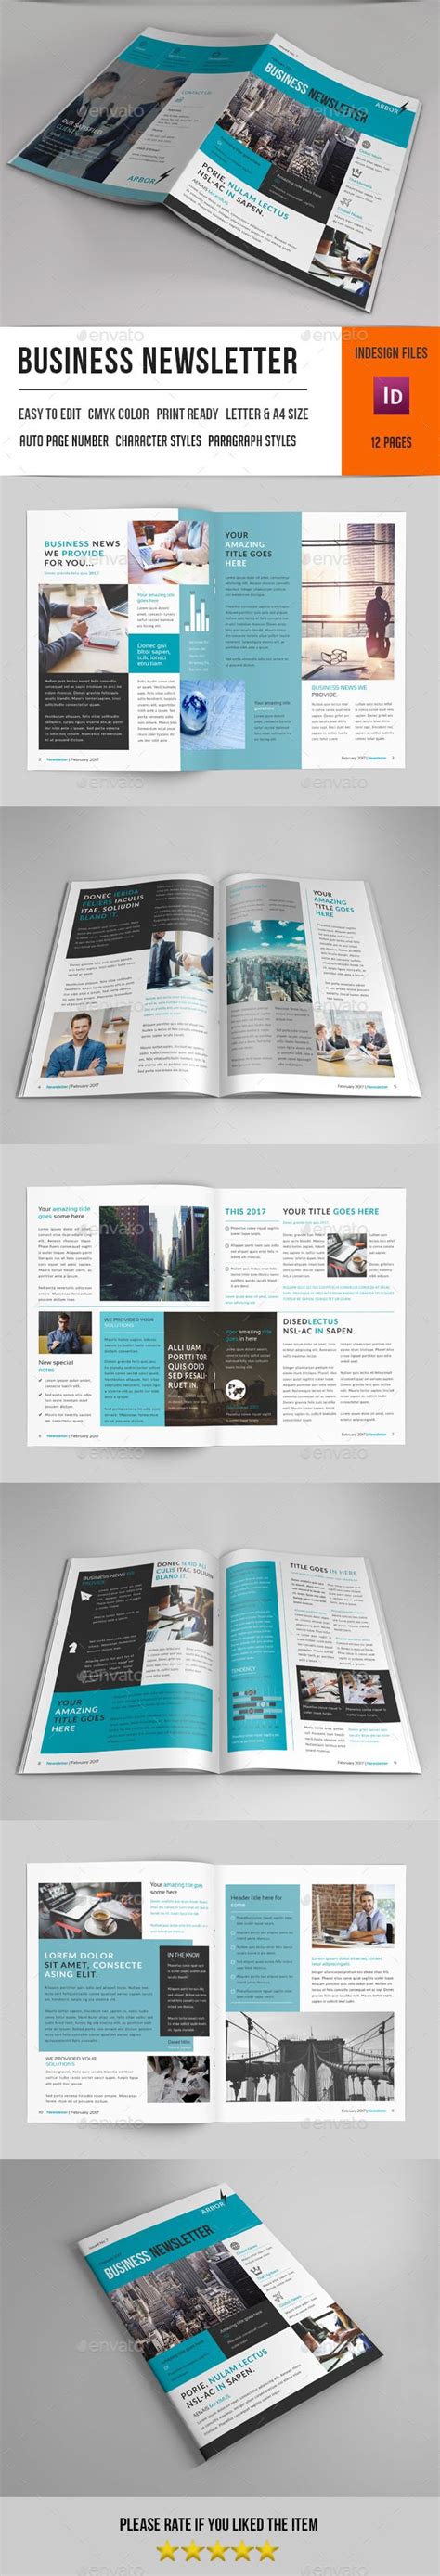 Business Newsletter V12 Newsletters Print Templates Download Here